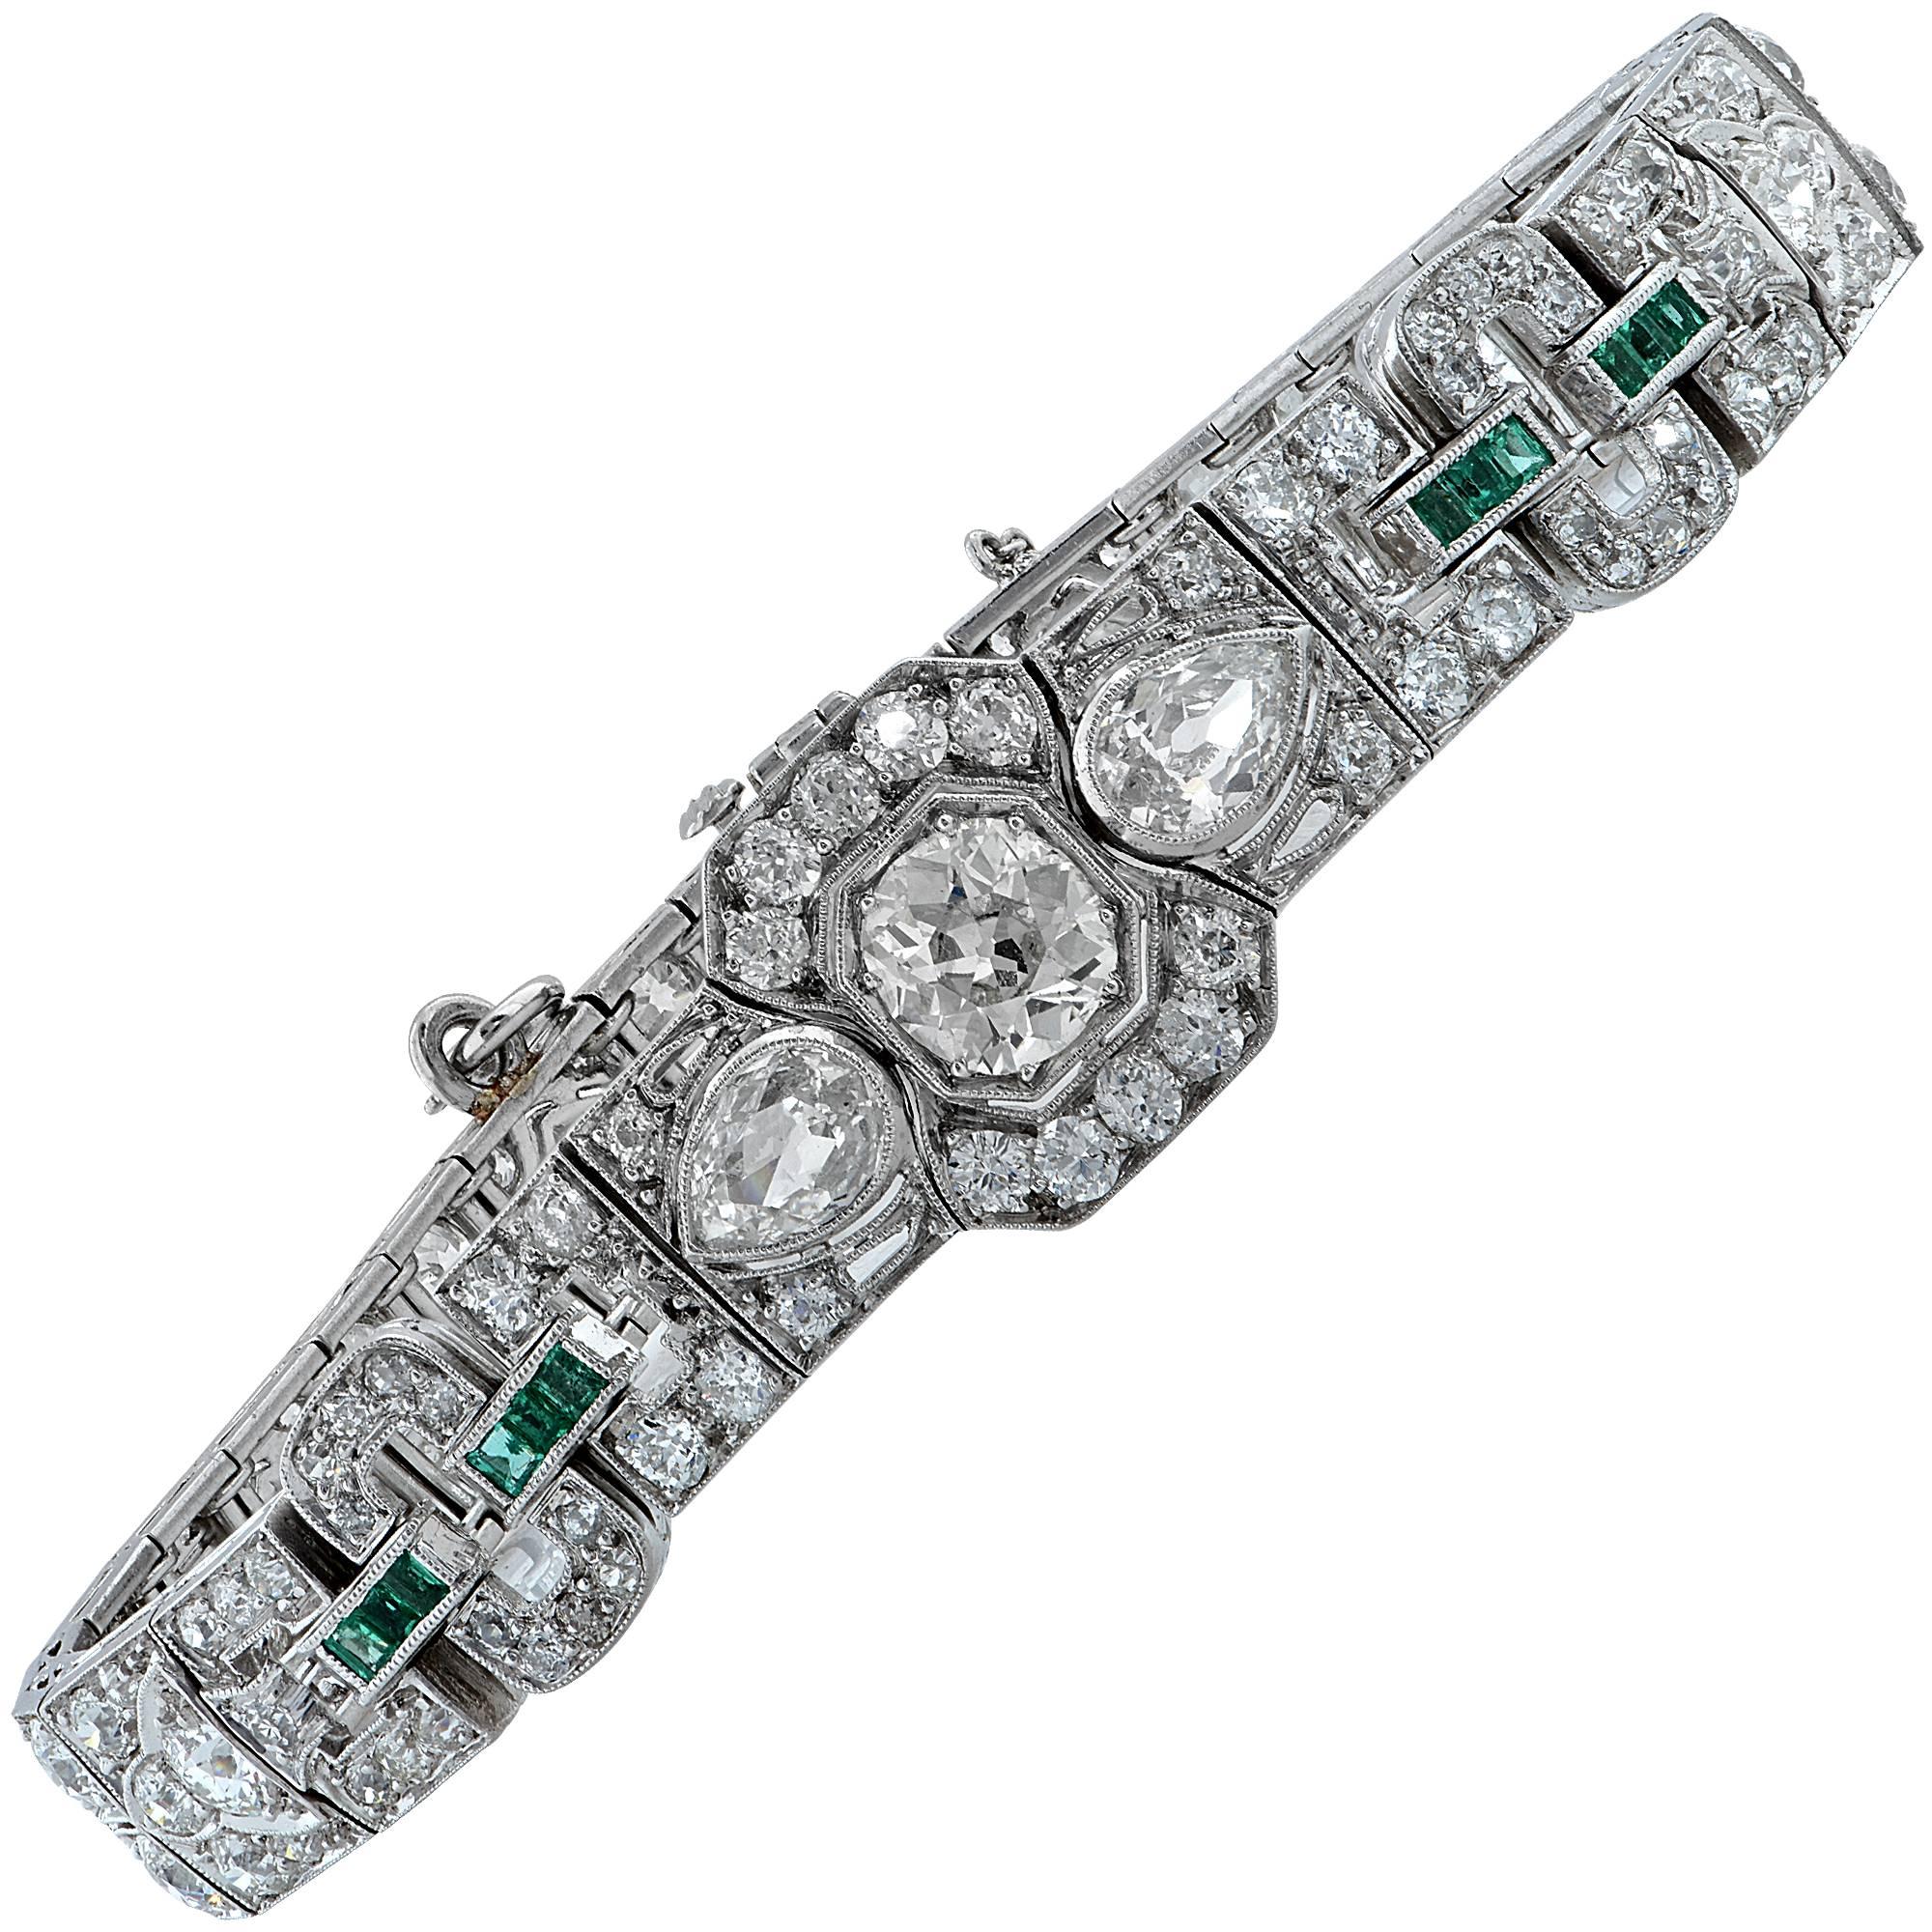 Platinum Art Deco bracelet containing a European cut diamond weighing approximately 1ct in the center of the bracelet, flanked by 2 pear shape diamonds weighing approximately 1ct total. The bracelet is further adorned with 57 European cut diamonds